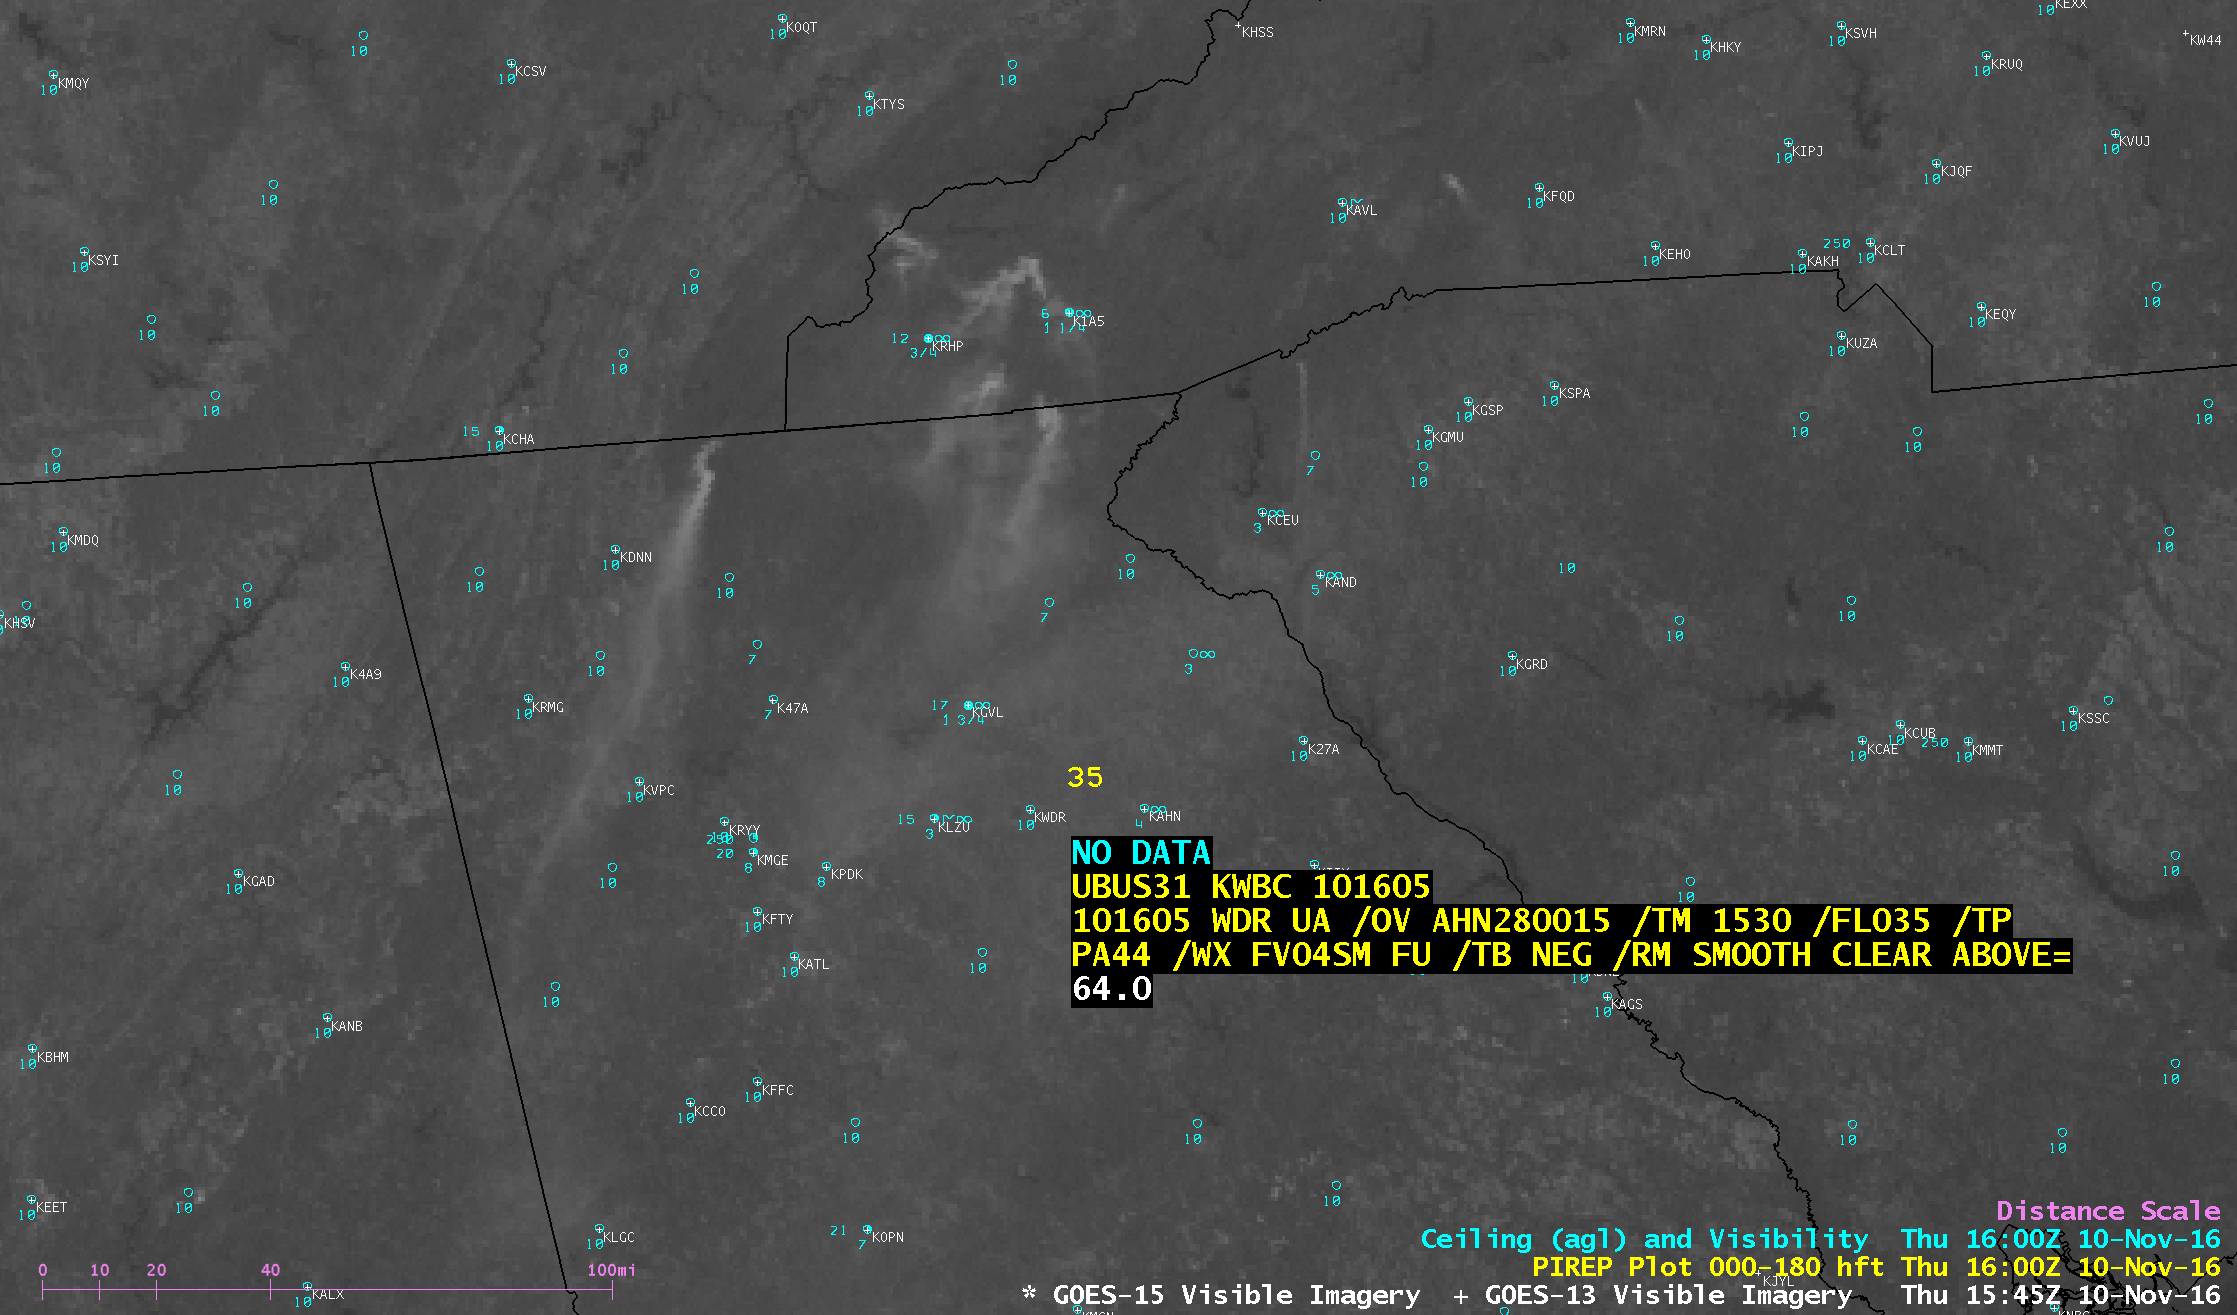 GOES-13 Visible (0.63 µm) image, with cloud ceiling (hundreds of feet above ground level) and visibility (statute miles) plotted in cyan and a Pilot Report in yellow [click to enlarge]